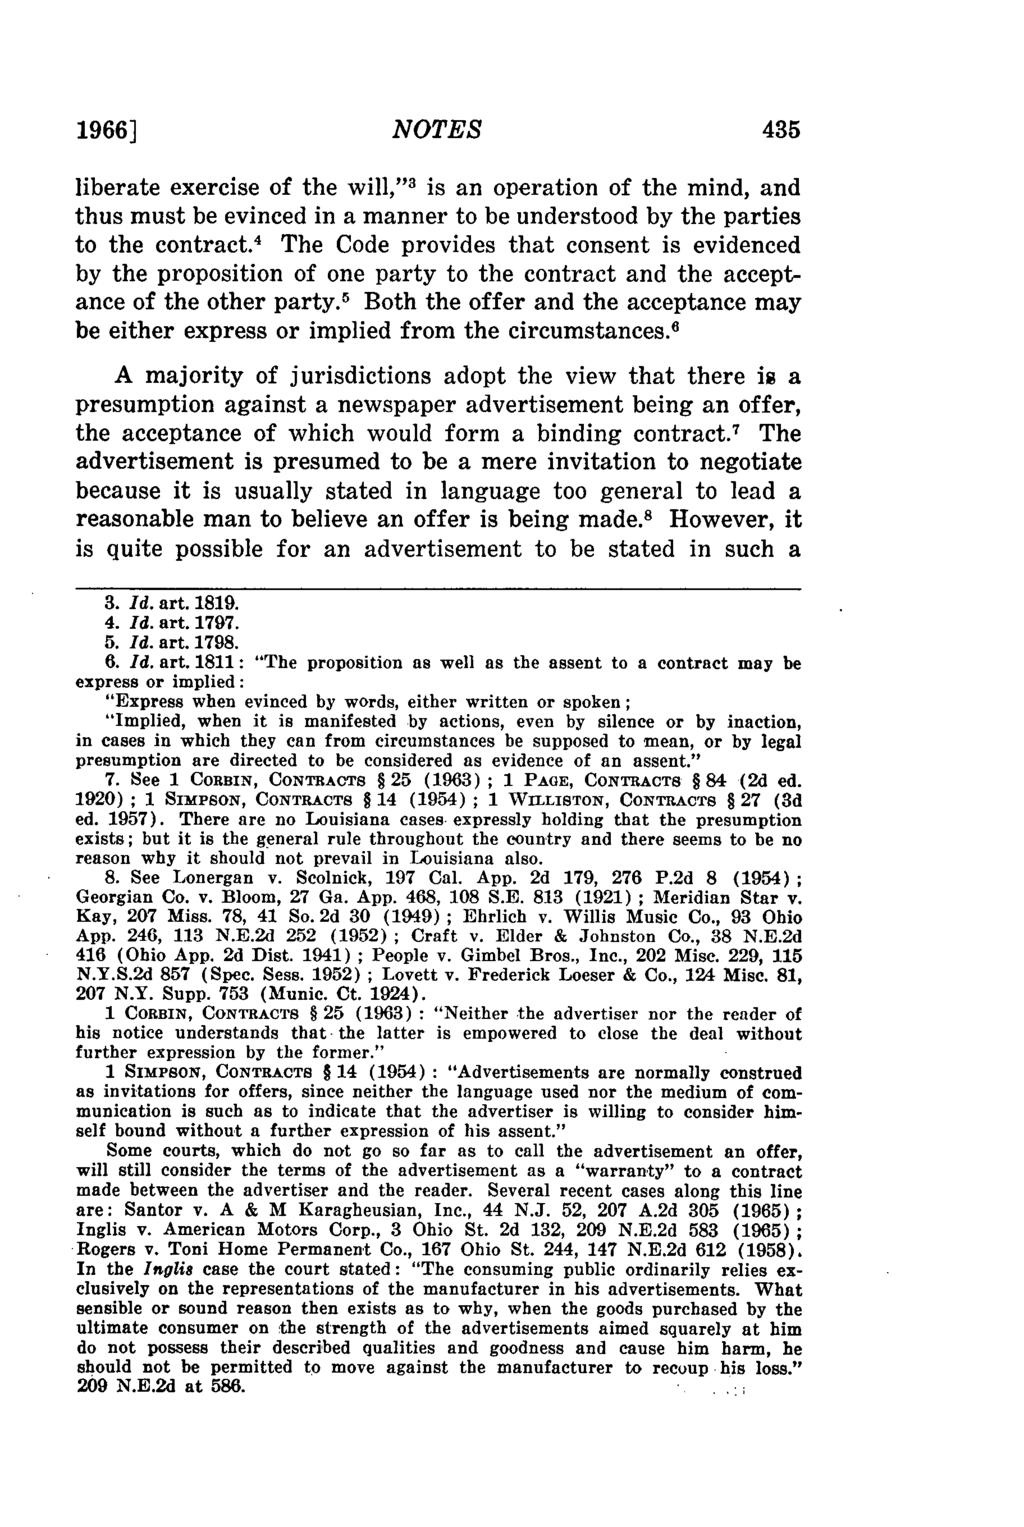 1966] NOTES liberate exercise of the will," ' is an operation of the mind, and thus must be evinced in a manner to be understood by the parties to the contract.